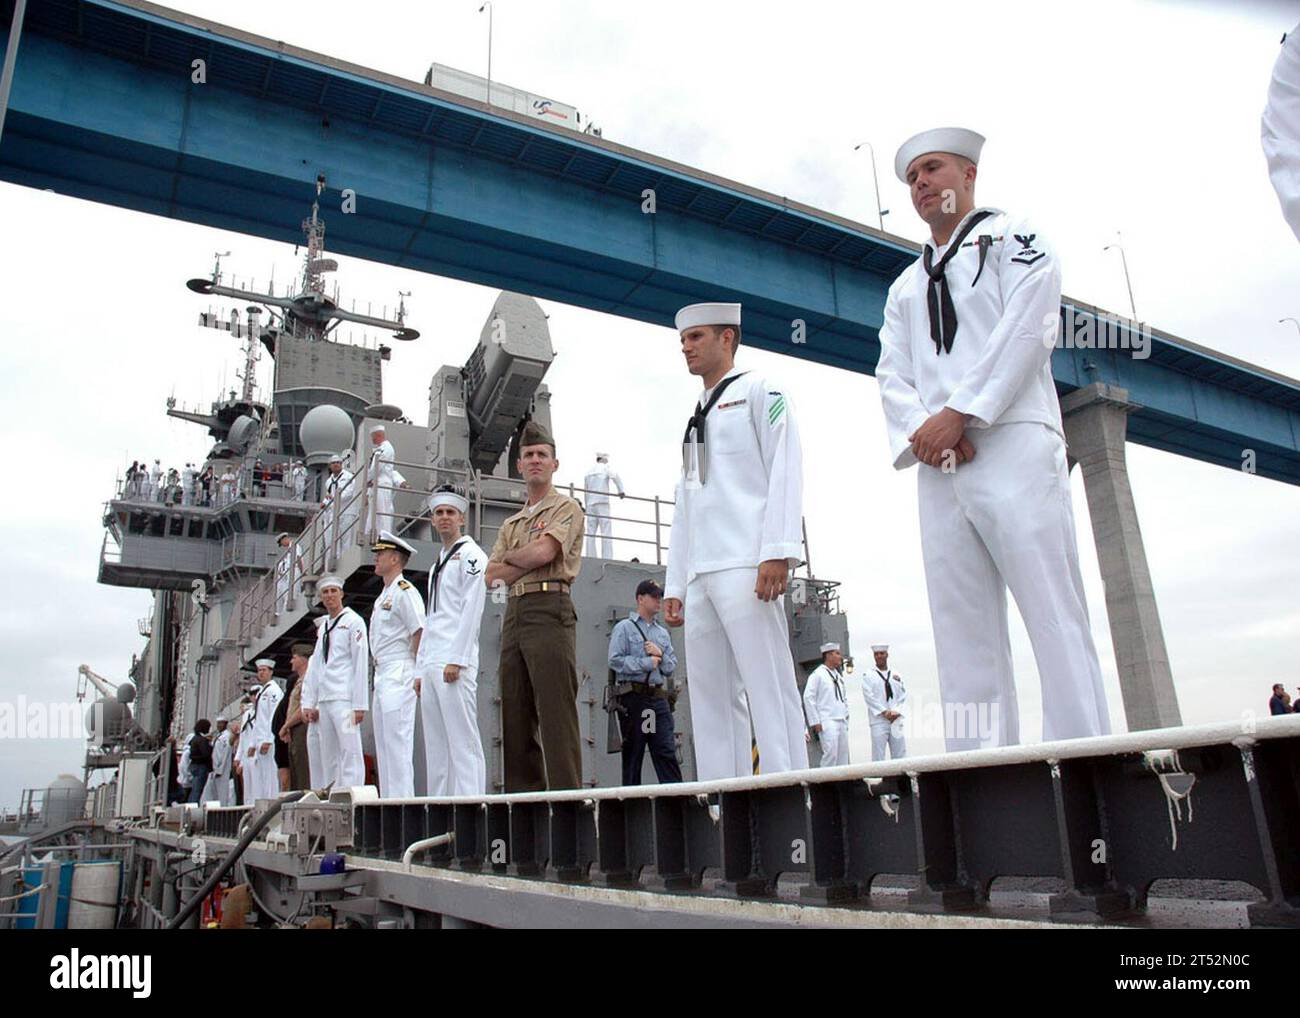 0705315914D-001 PACIFIC OCEAN (May 31, 2007) - Sailors and Marines assigned aboard the amphibious assault ship USS Boxer (LHD 4) man the rails as the ship enters San Diego Harbor. Boxer the flagship of Boxer Expeditionary Strike Group is returning from its nine-month, twice-extended Western Pacific deployment, where it conducted counter-insurgency operations and Maritime Operations to promote security and stability in the region. U.S. Navy Stock Photo